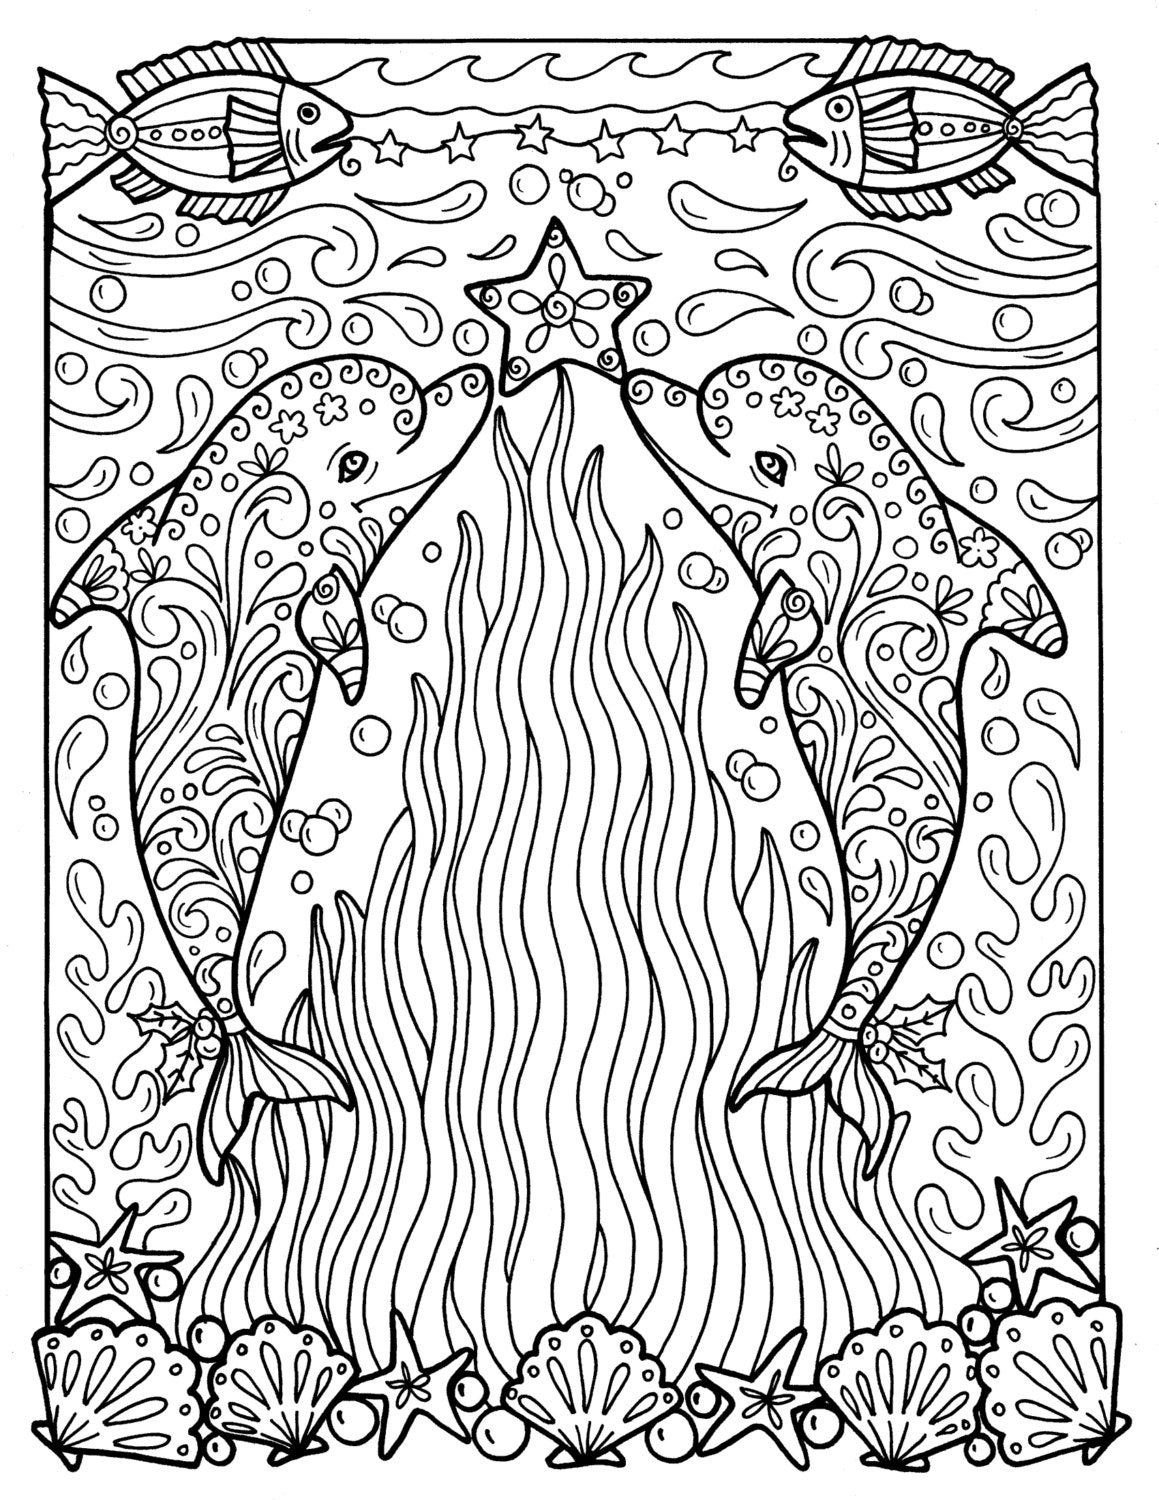 Christmas Dolphins Coloring Page Adult Coloring Beach Color | Etsy UK